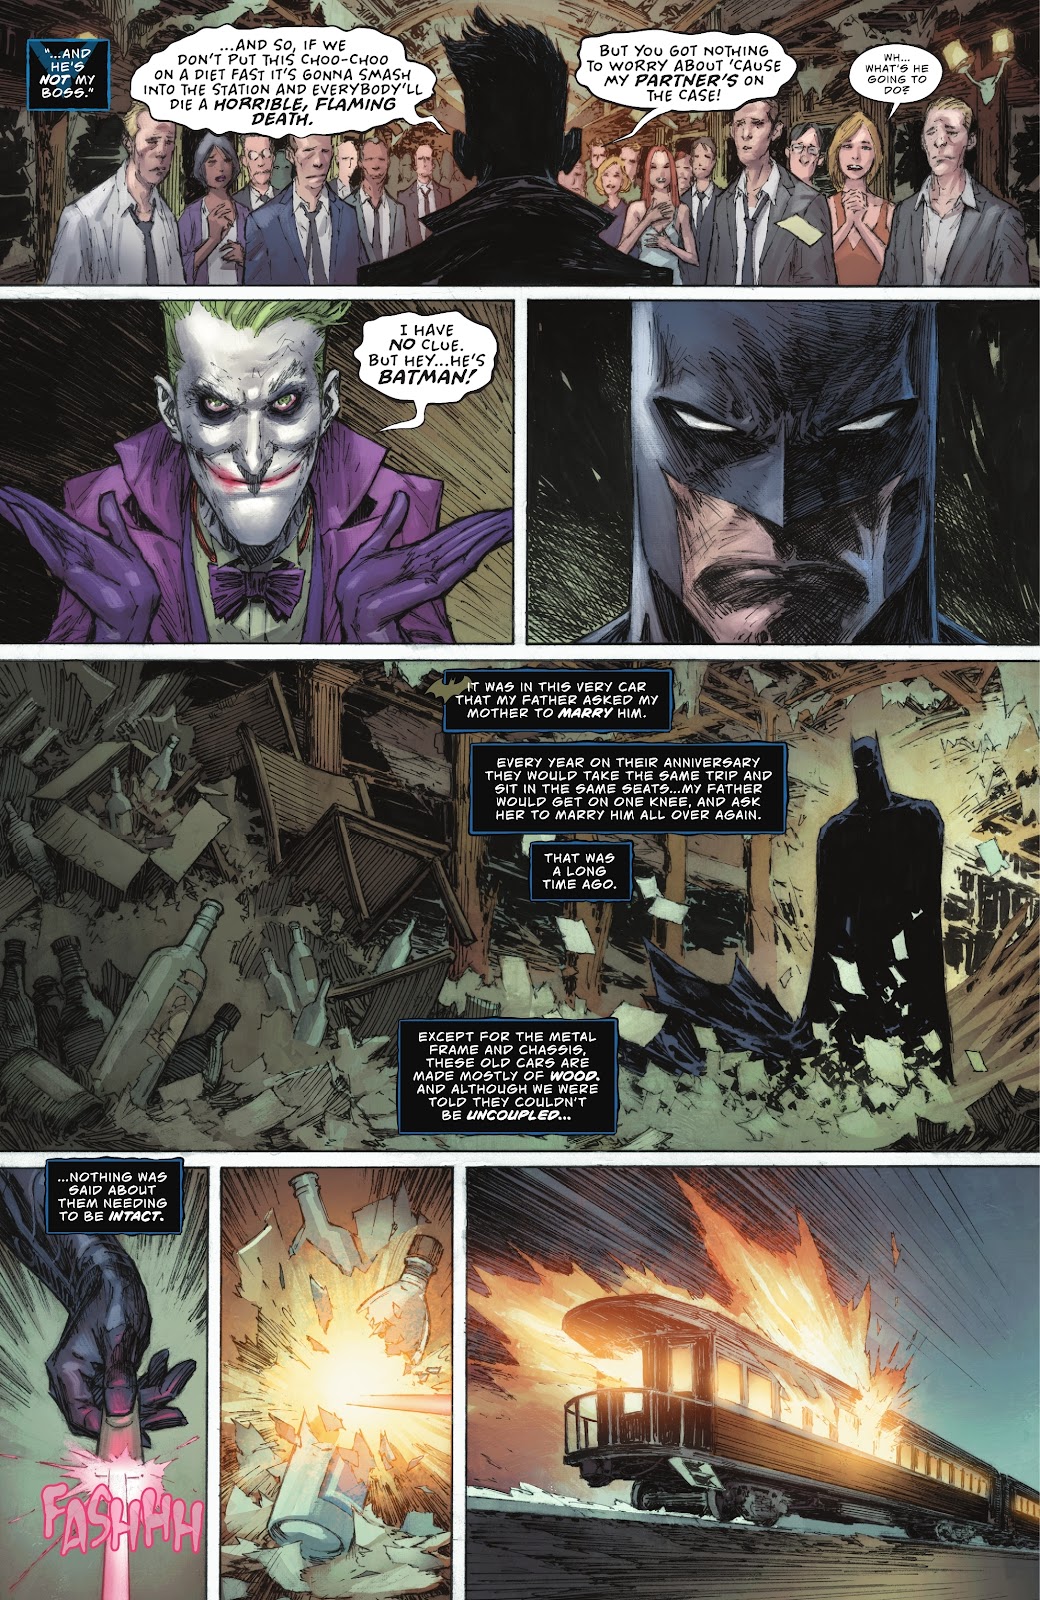 Batman & The Joker: The Deadly Duo issue 4 - Page 19